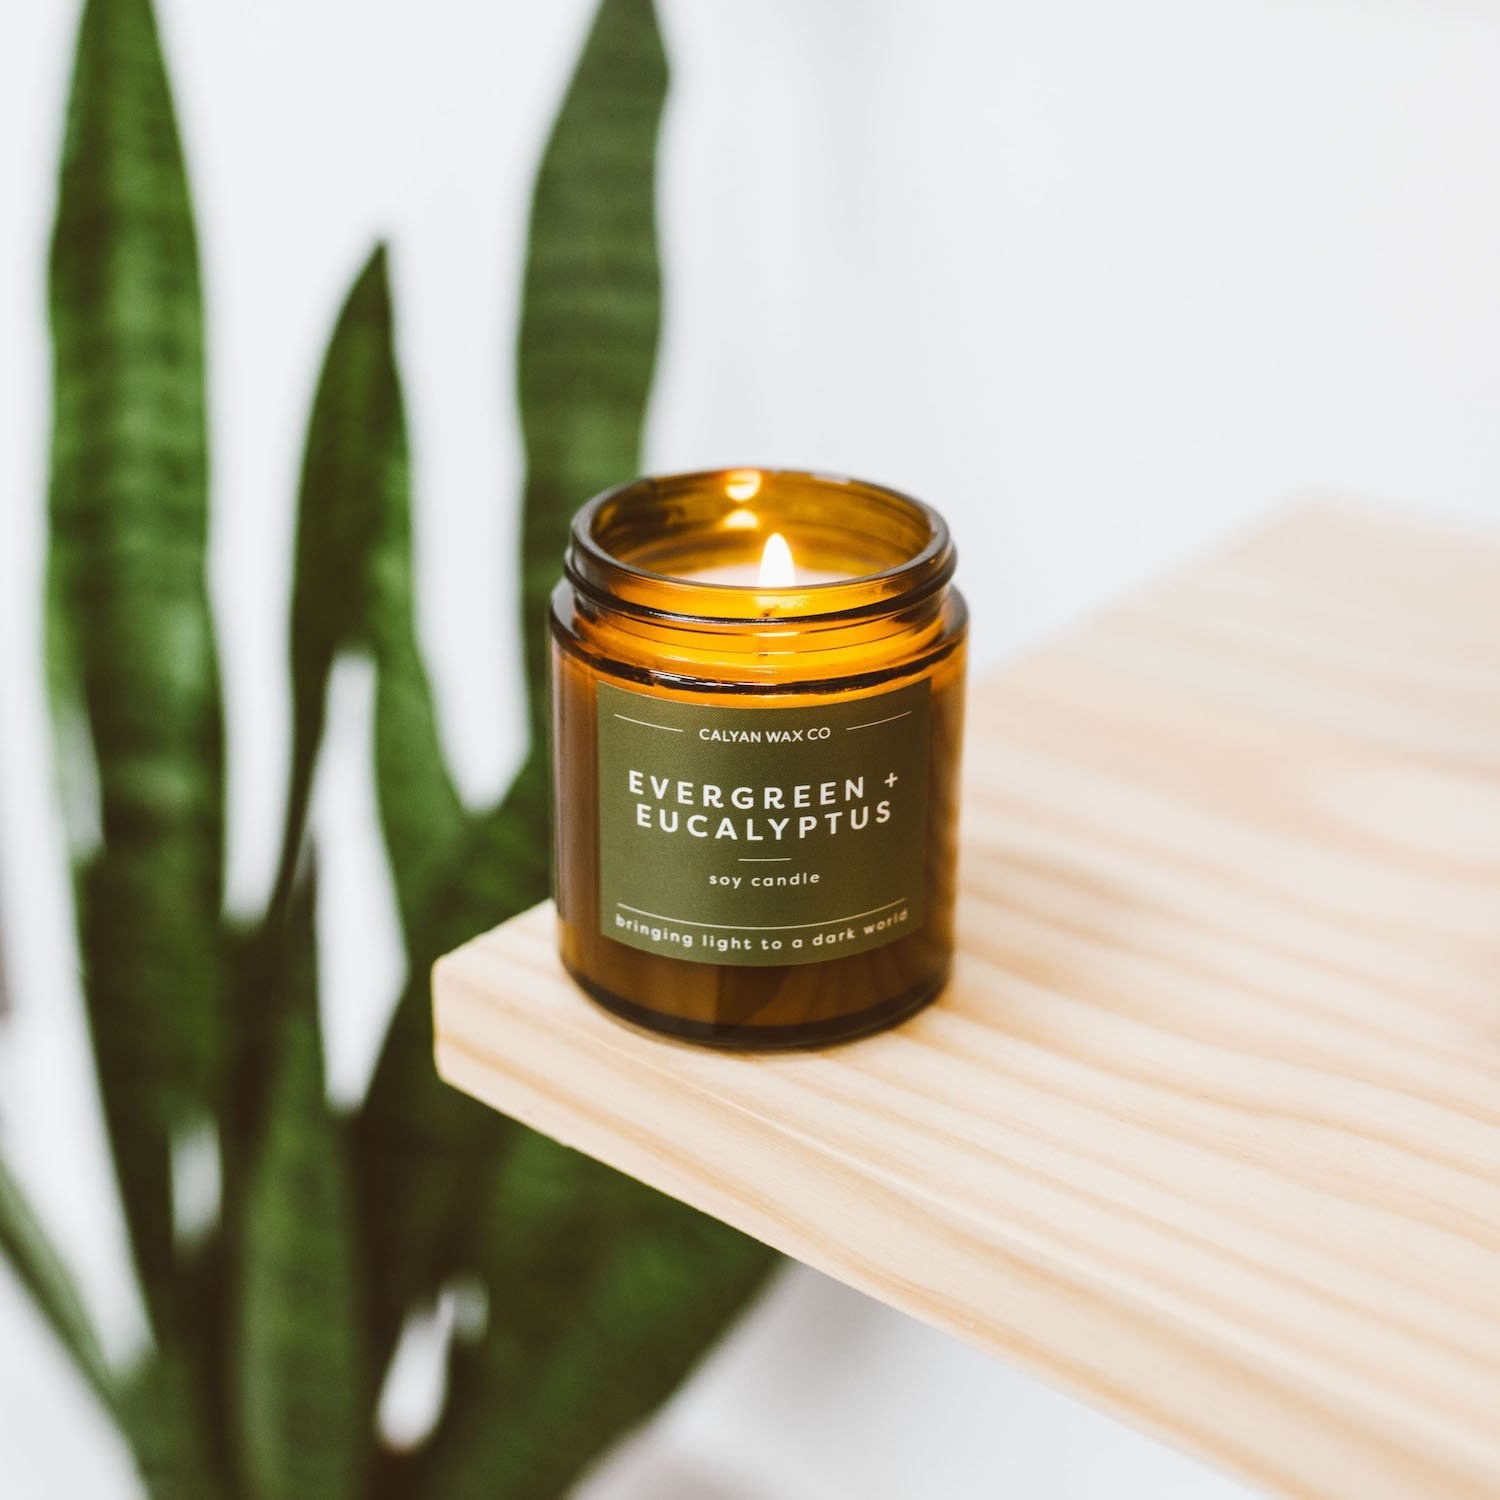 The 4-ounce evergreen and eucalyptus candle in an amber jar